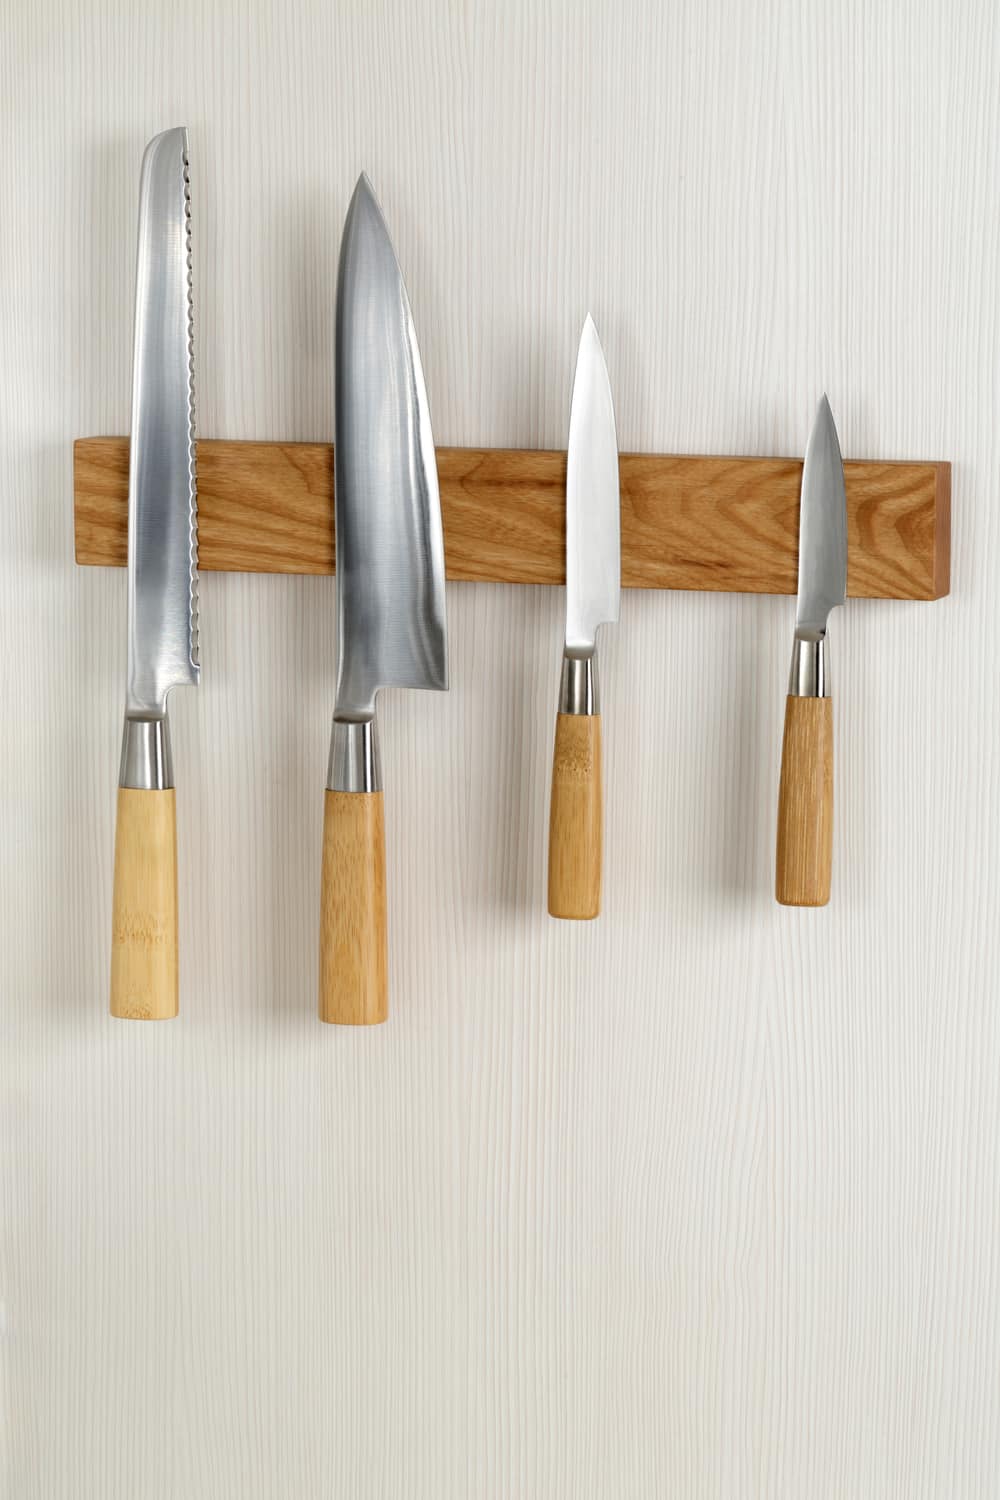 17 Homemade Magnetic Knife Holder Plans You Can DIY Easily